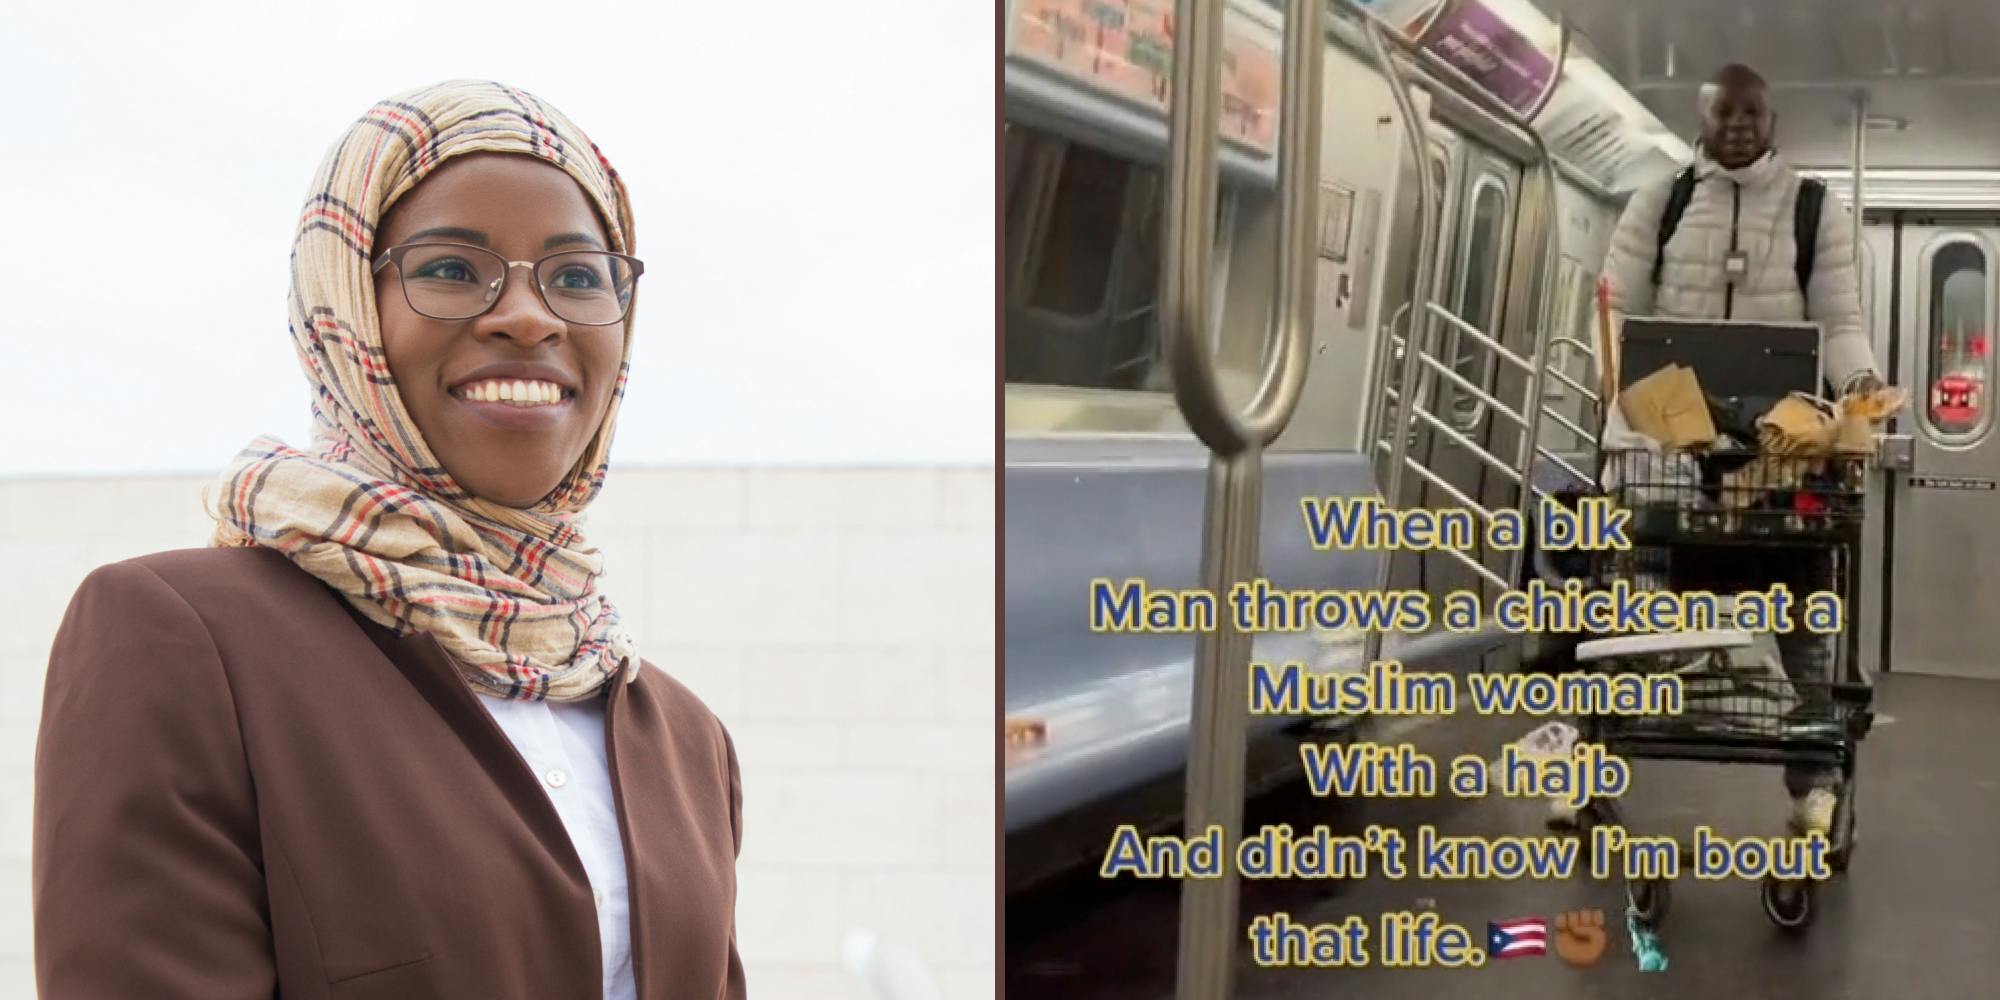 woman with hijab and brown coat and glasses (l) Subway man standing with cart caption " When a blk man throws a chicken at a Muslim woman with a hijab and didn't know I'm bout that life." (r)